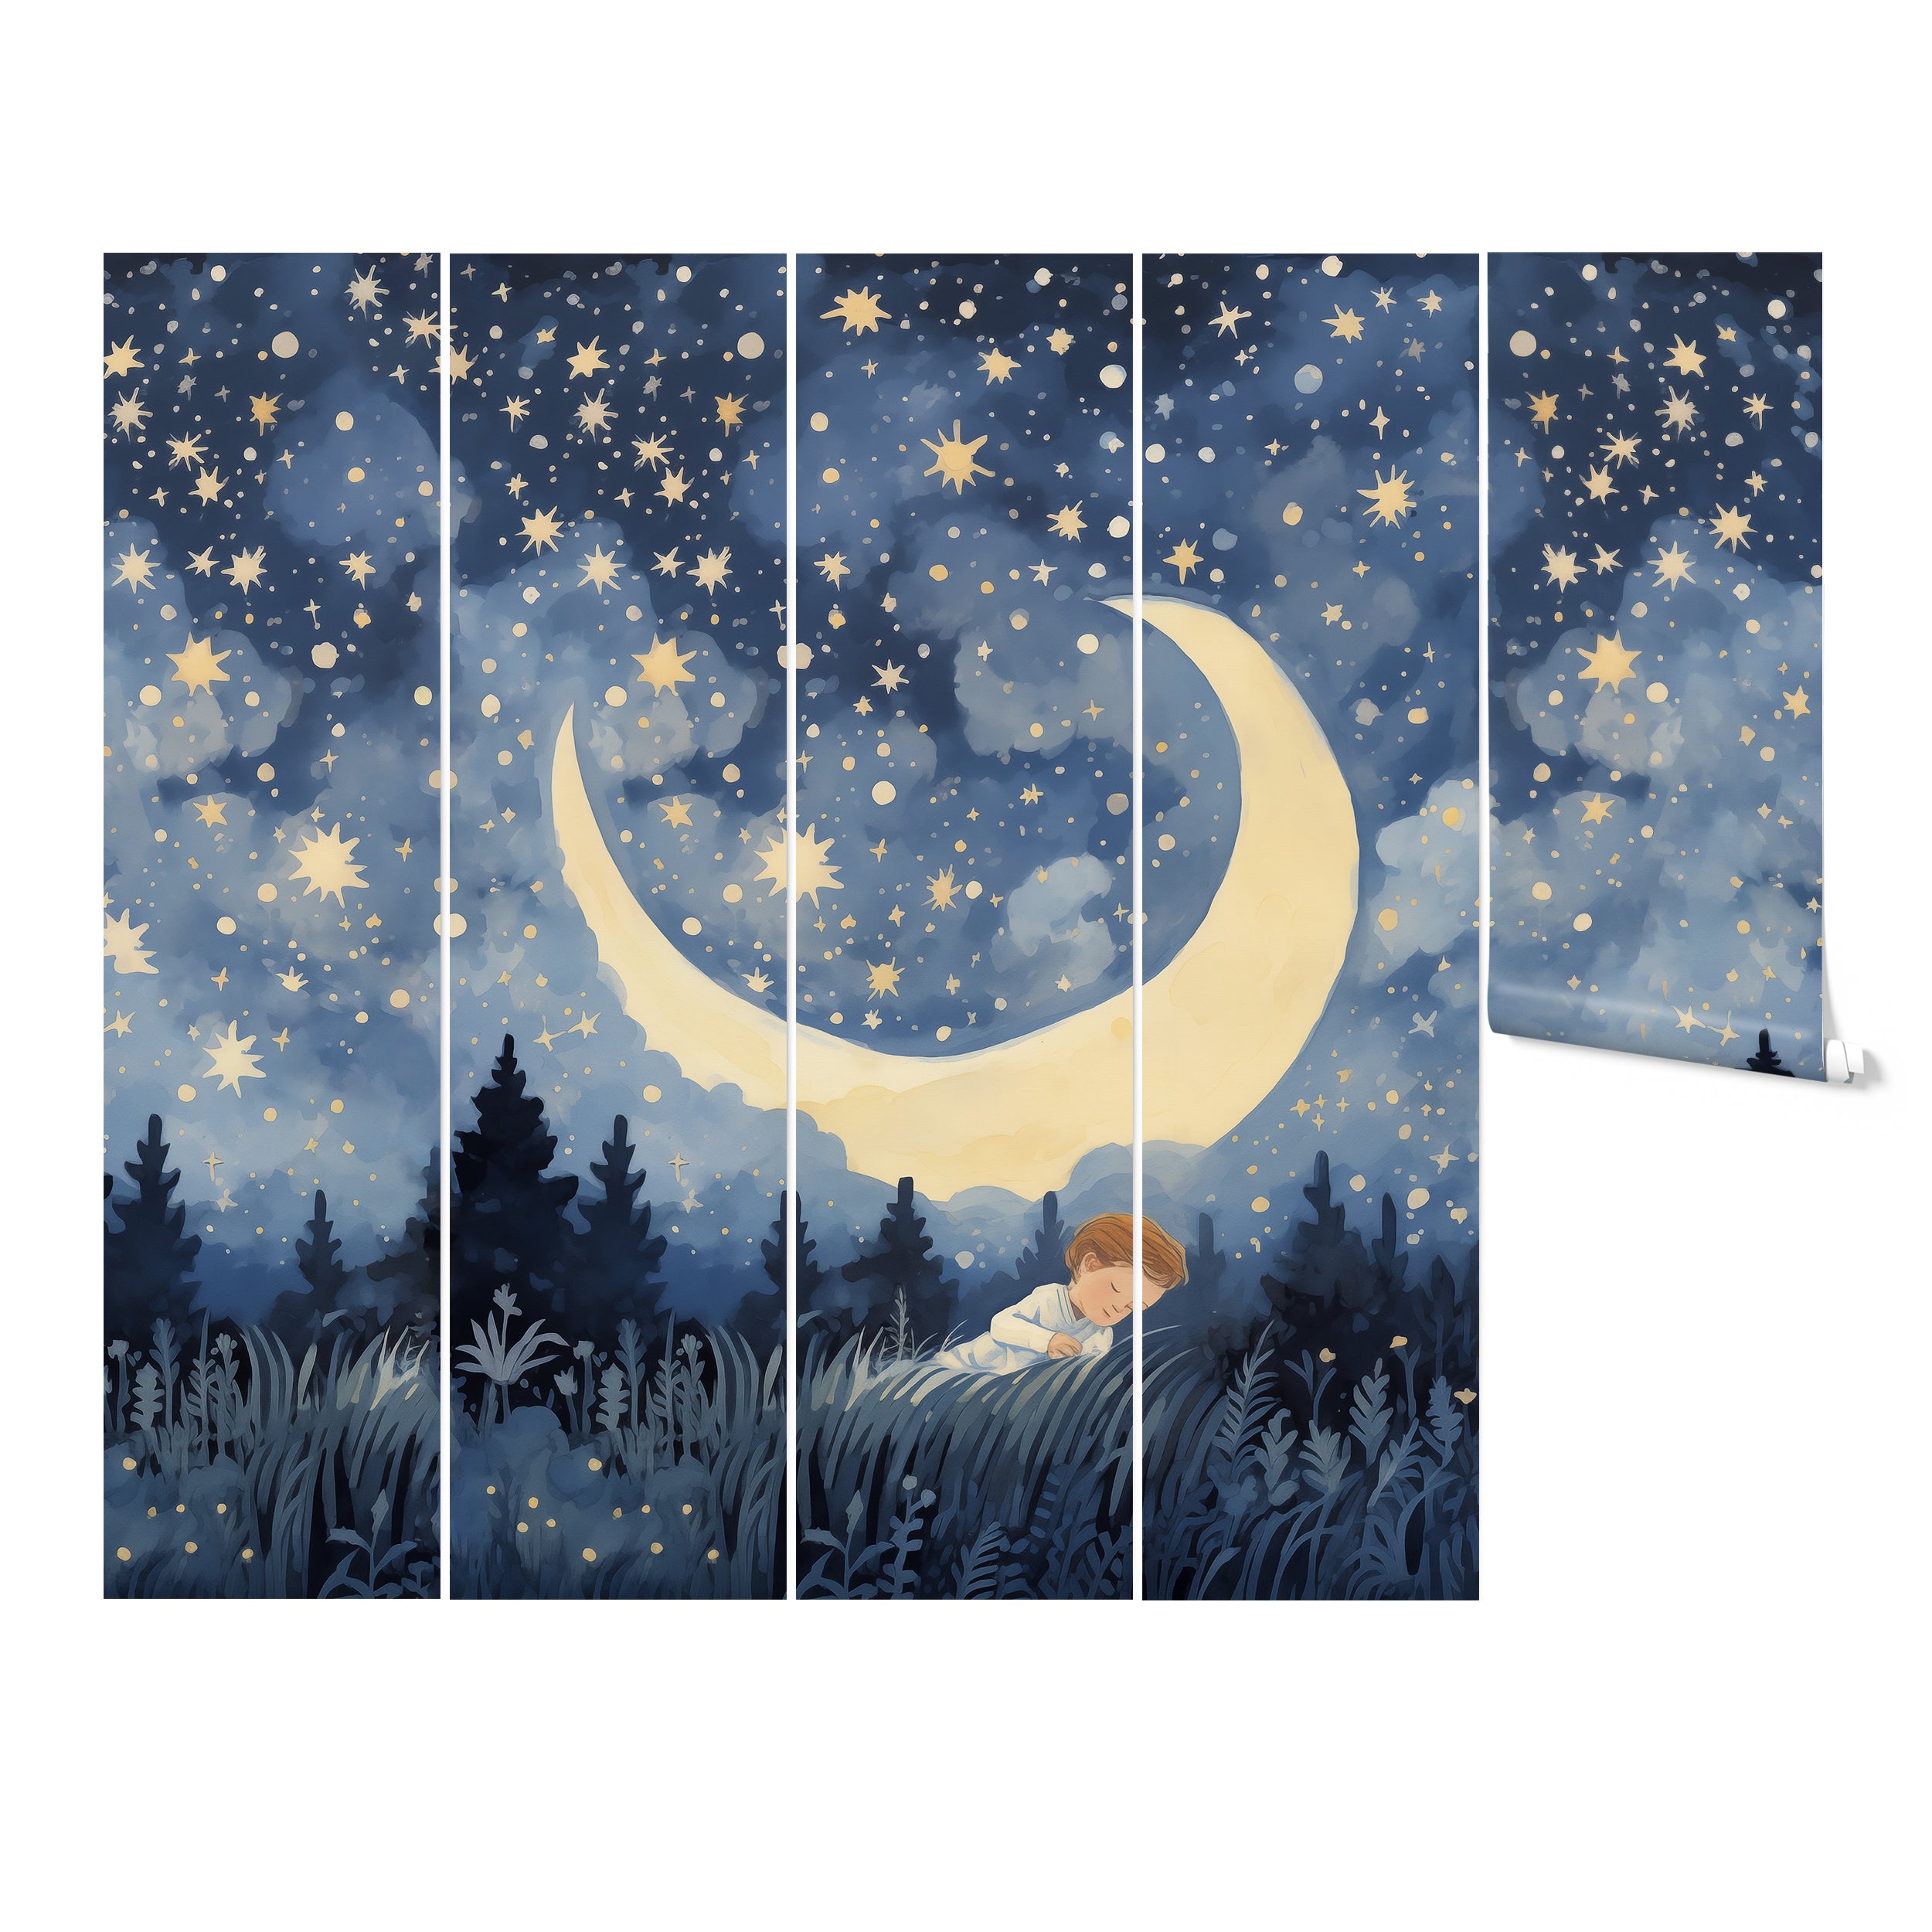 Segmented wall panels depicting a crescent moon and stars over a dark forest landscape